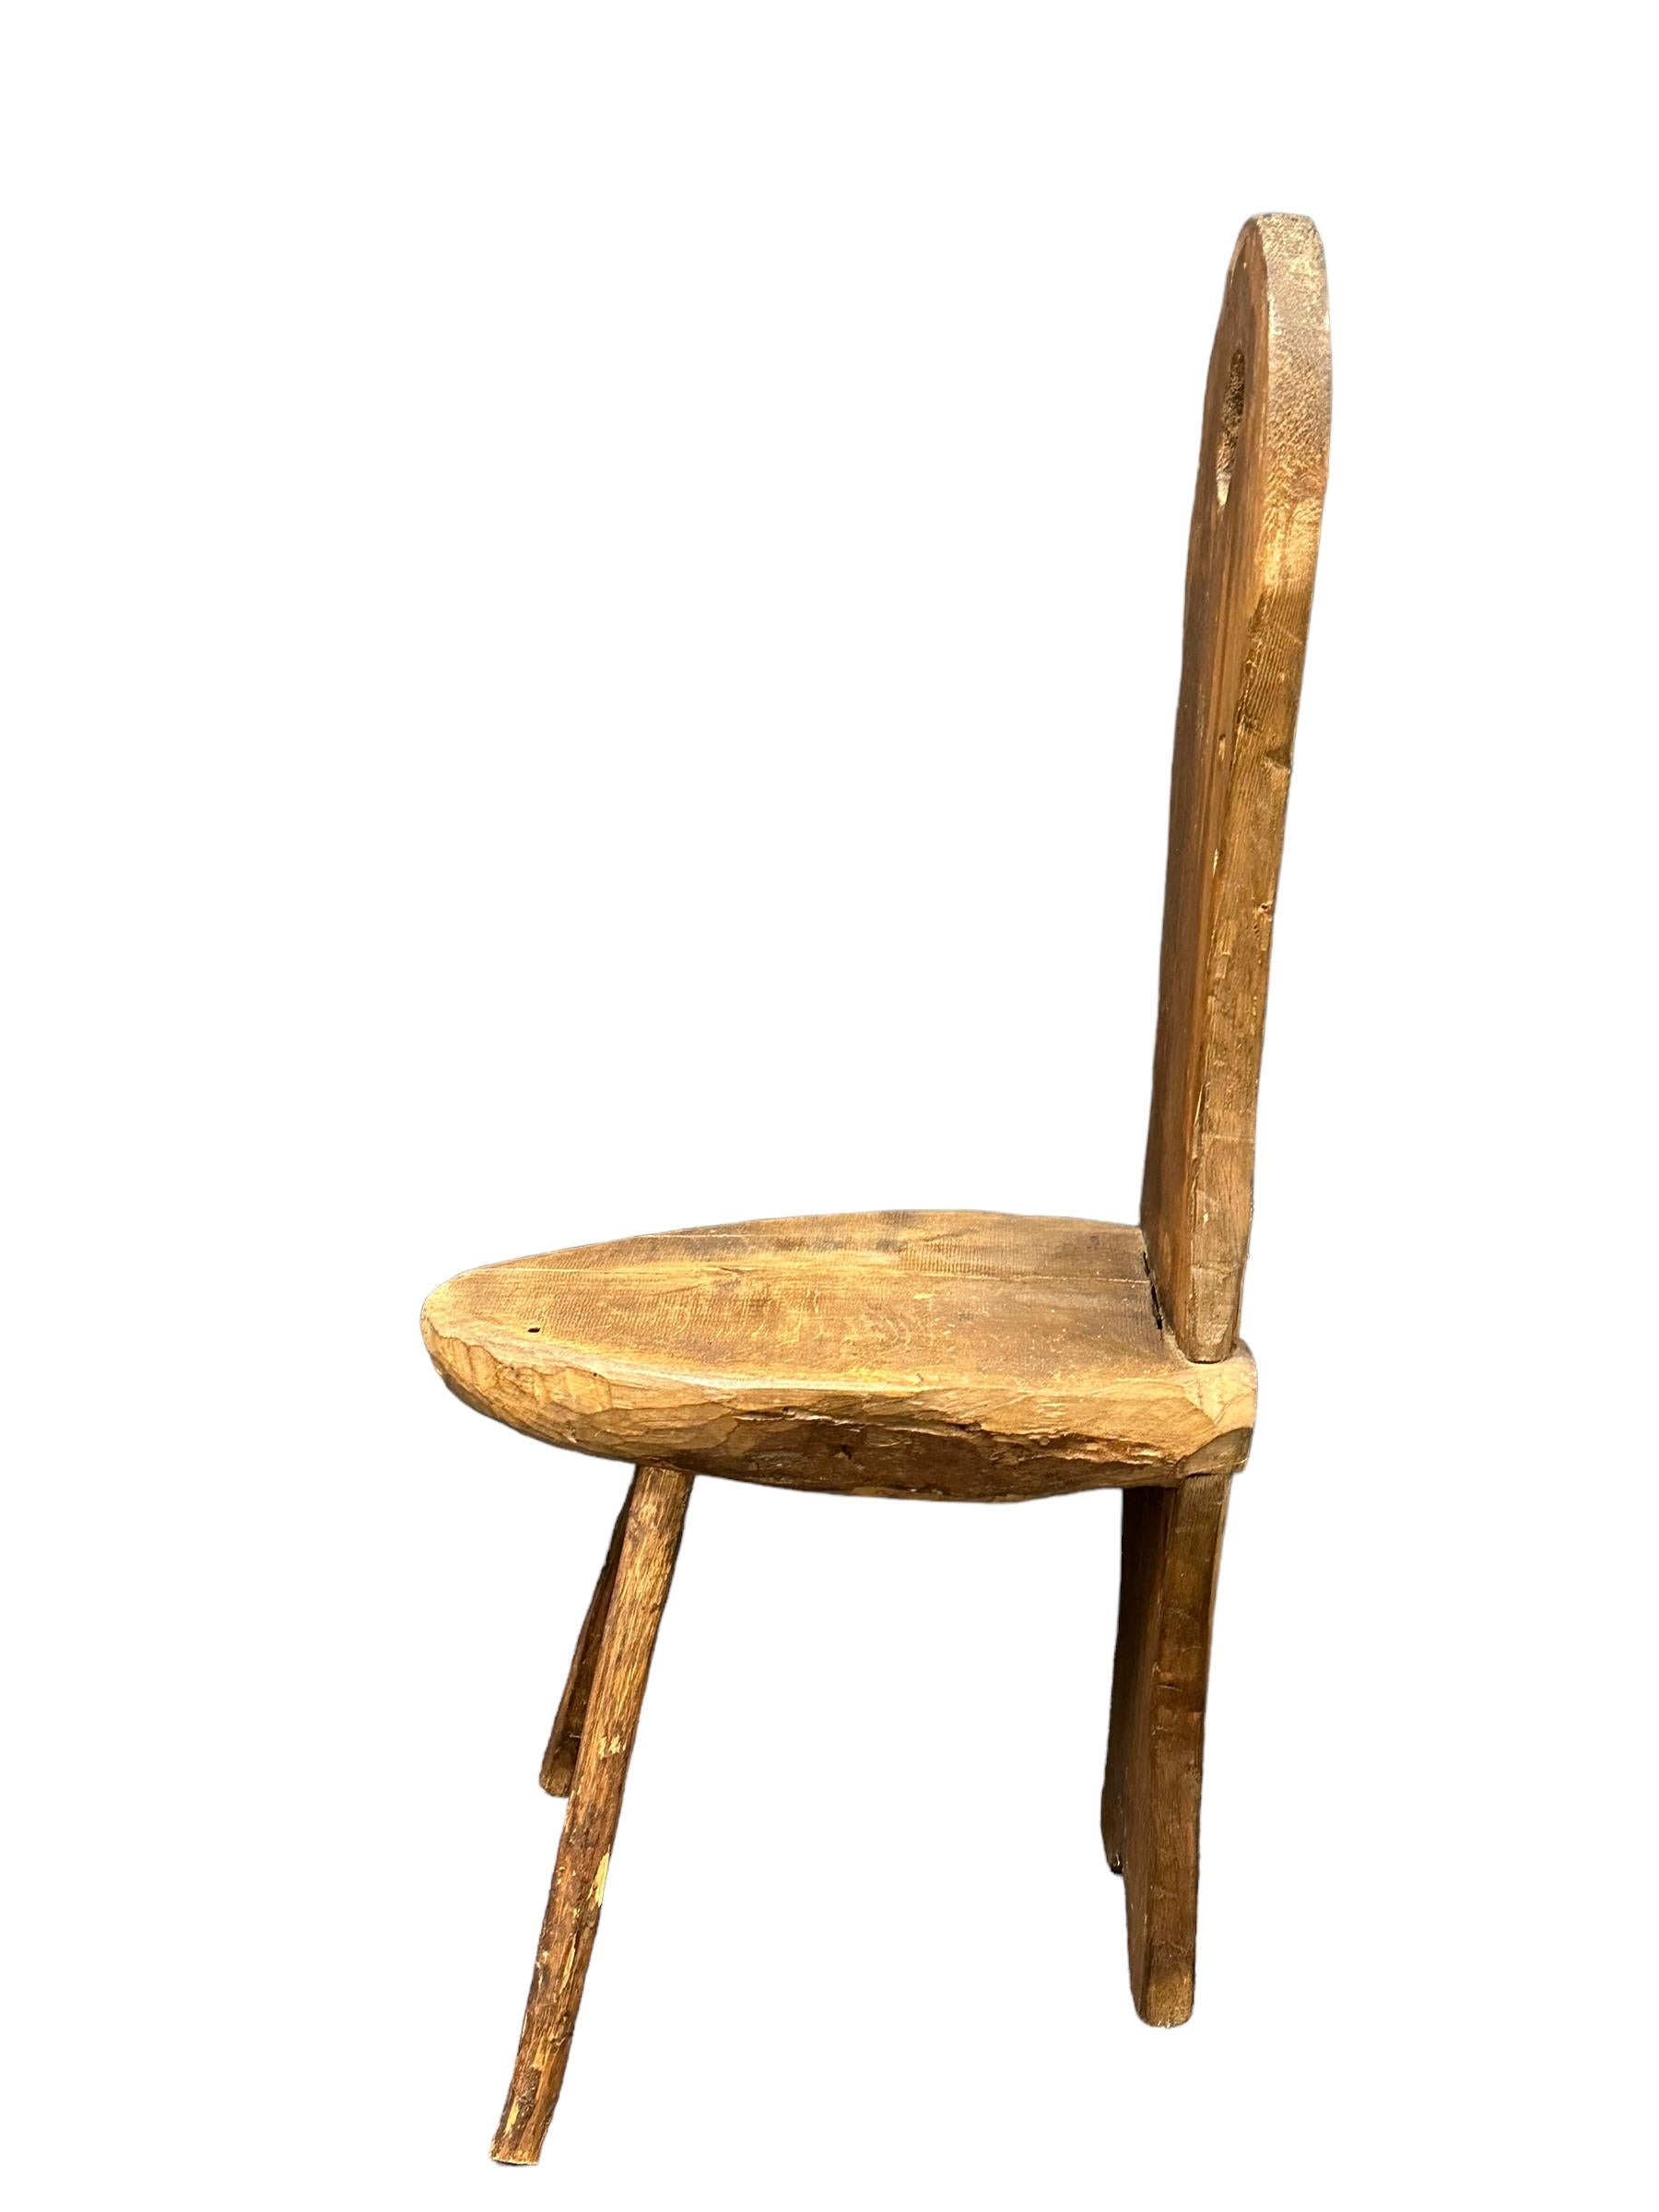 Interesting Brutalist wood tripod chair from Germany. the seat was cut out of a tree trunk. Historically used as a chair in the farmhouses in Germany in the 19th Century, this modern brutalist version will make a great piece of functional sculpture.